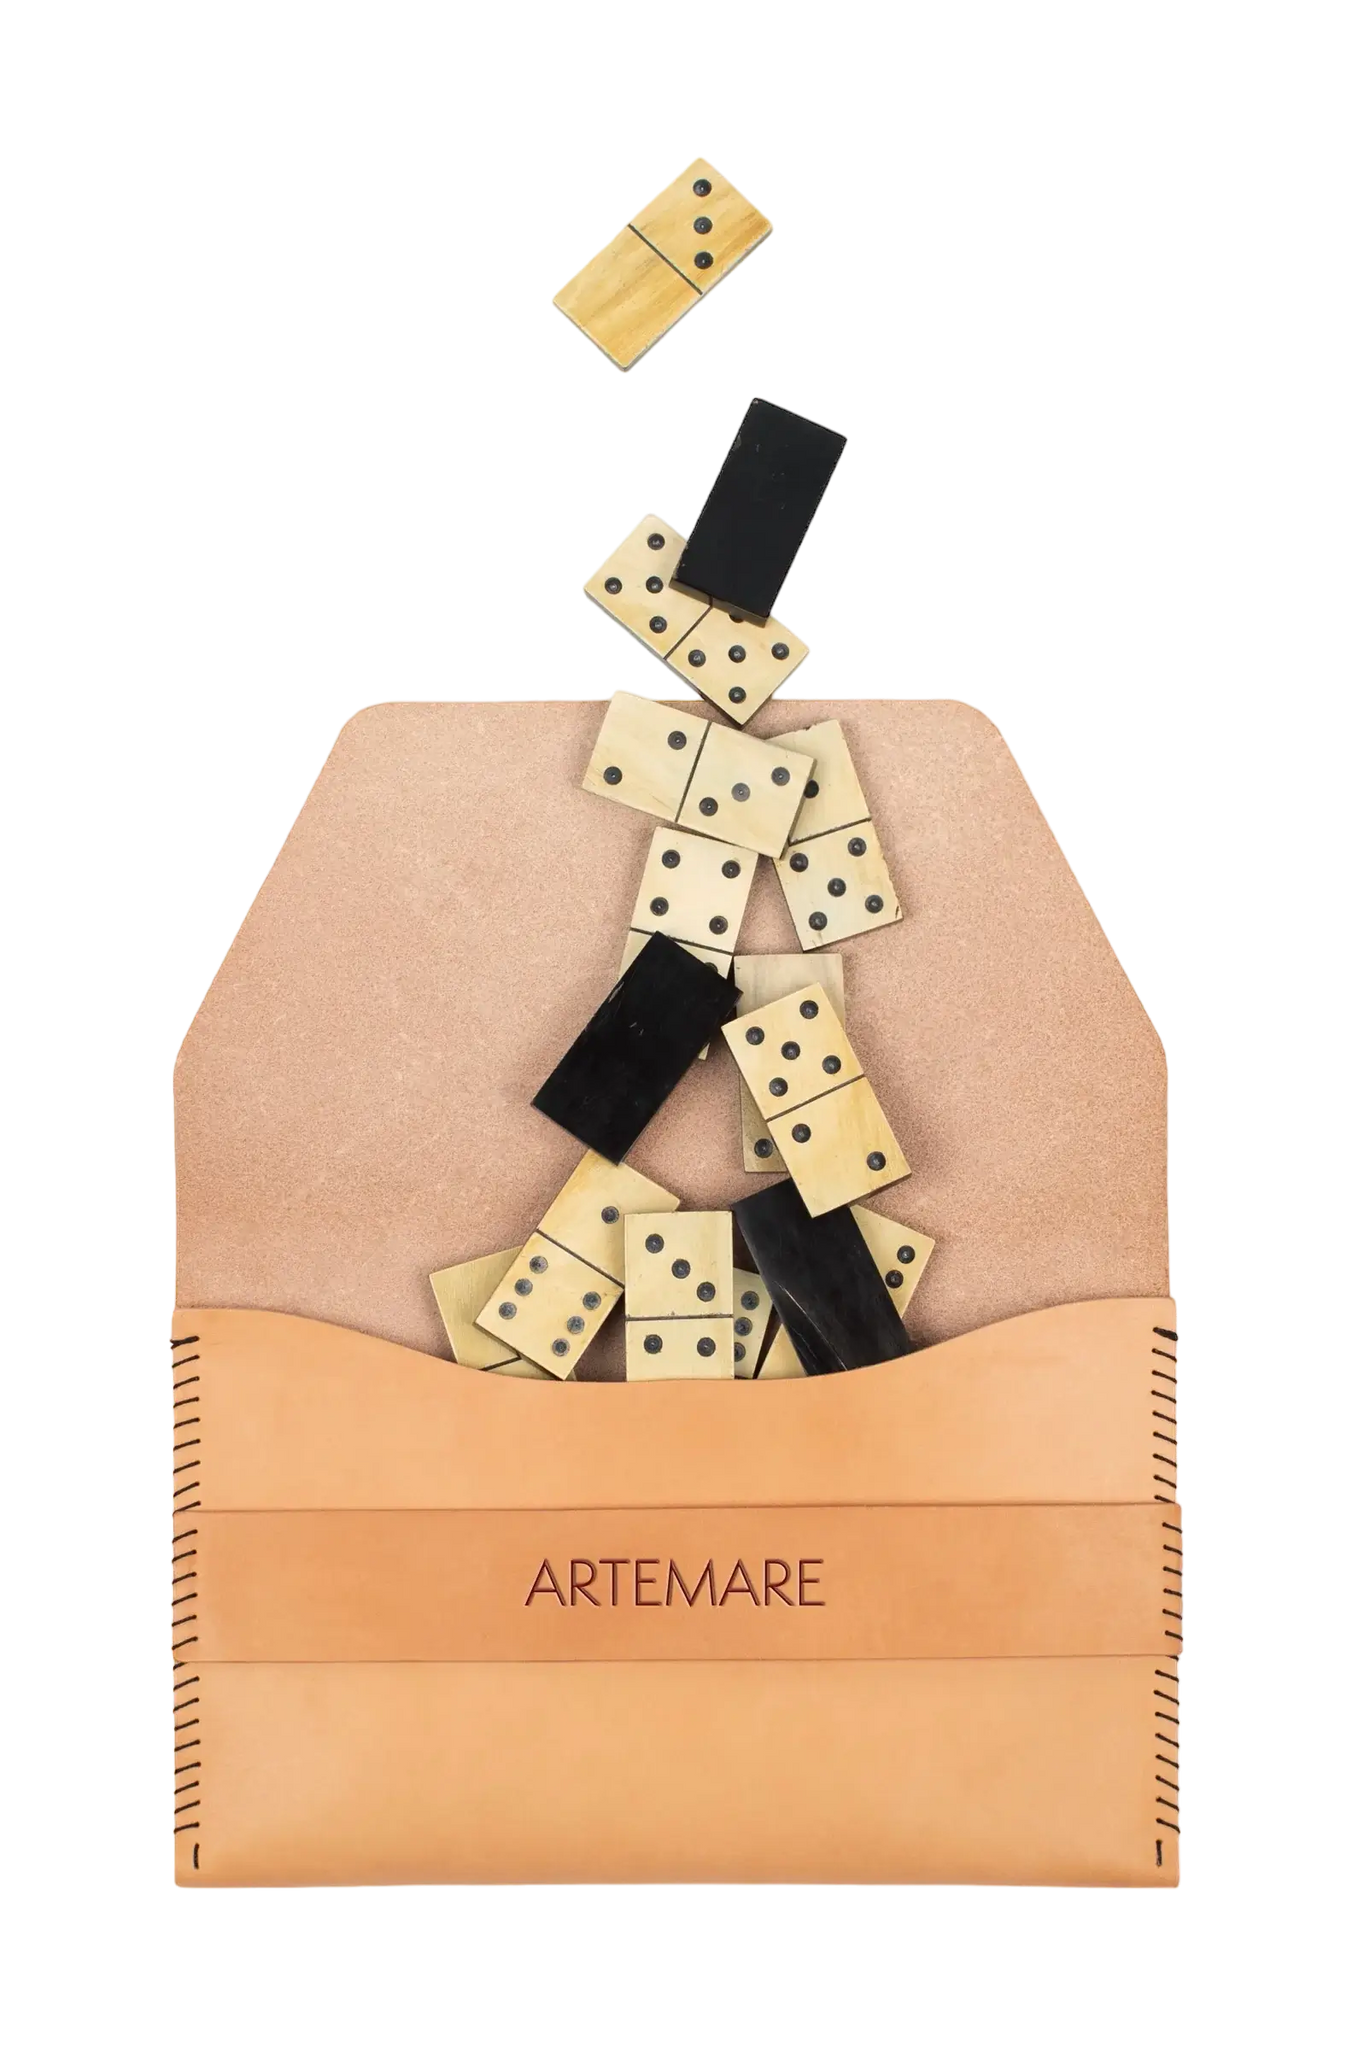 Artemare's designer domino set showing the handcrafted domino pieces and a luxury leather case